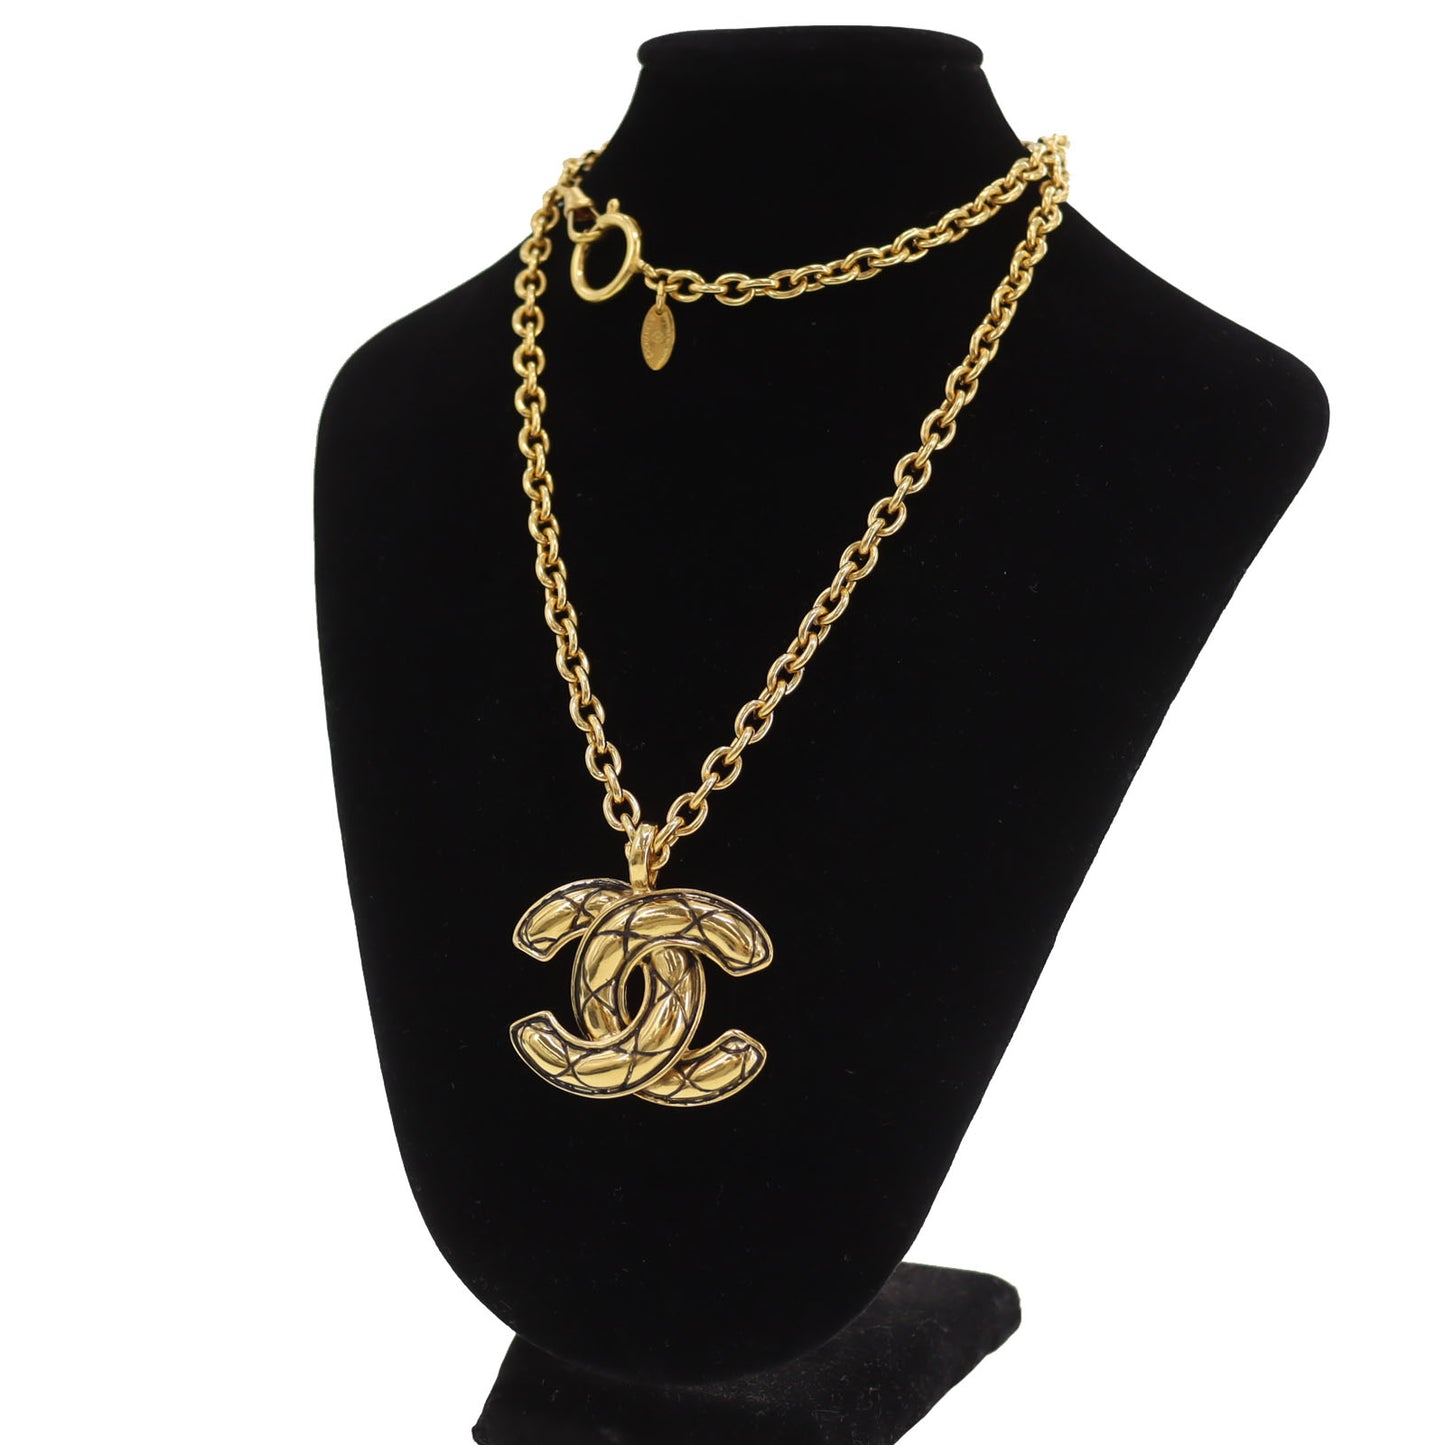 CHANEL CC Matelasse motif Chain Necklace Gold Plated 3858 #BX803